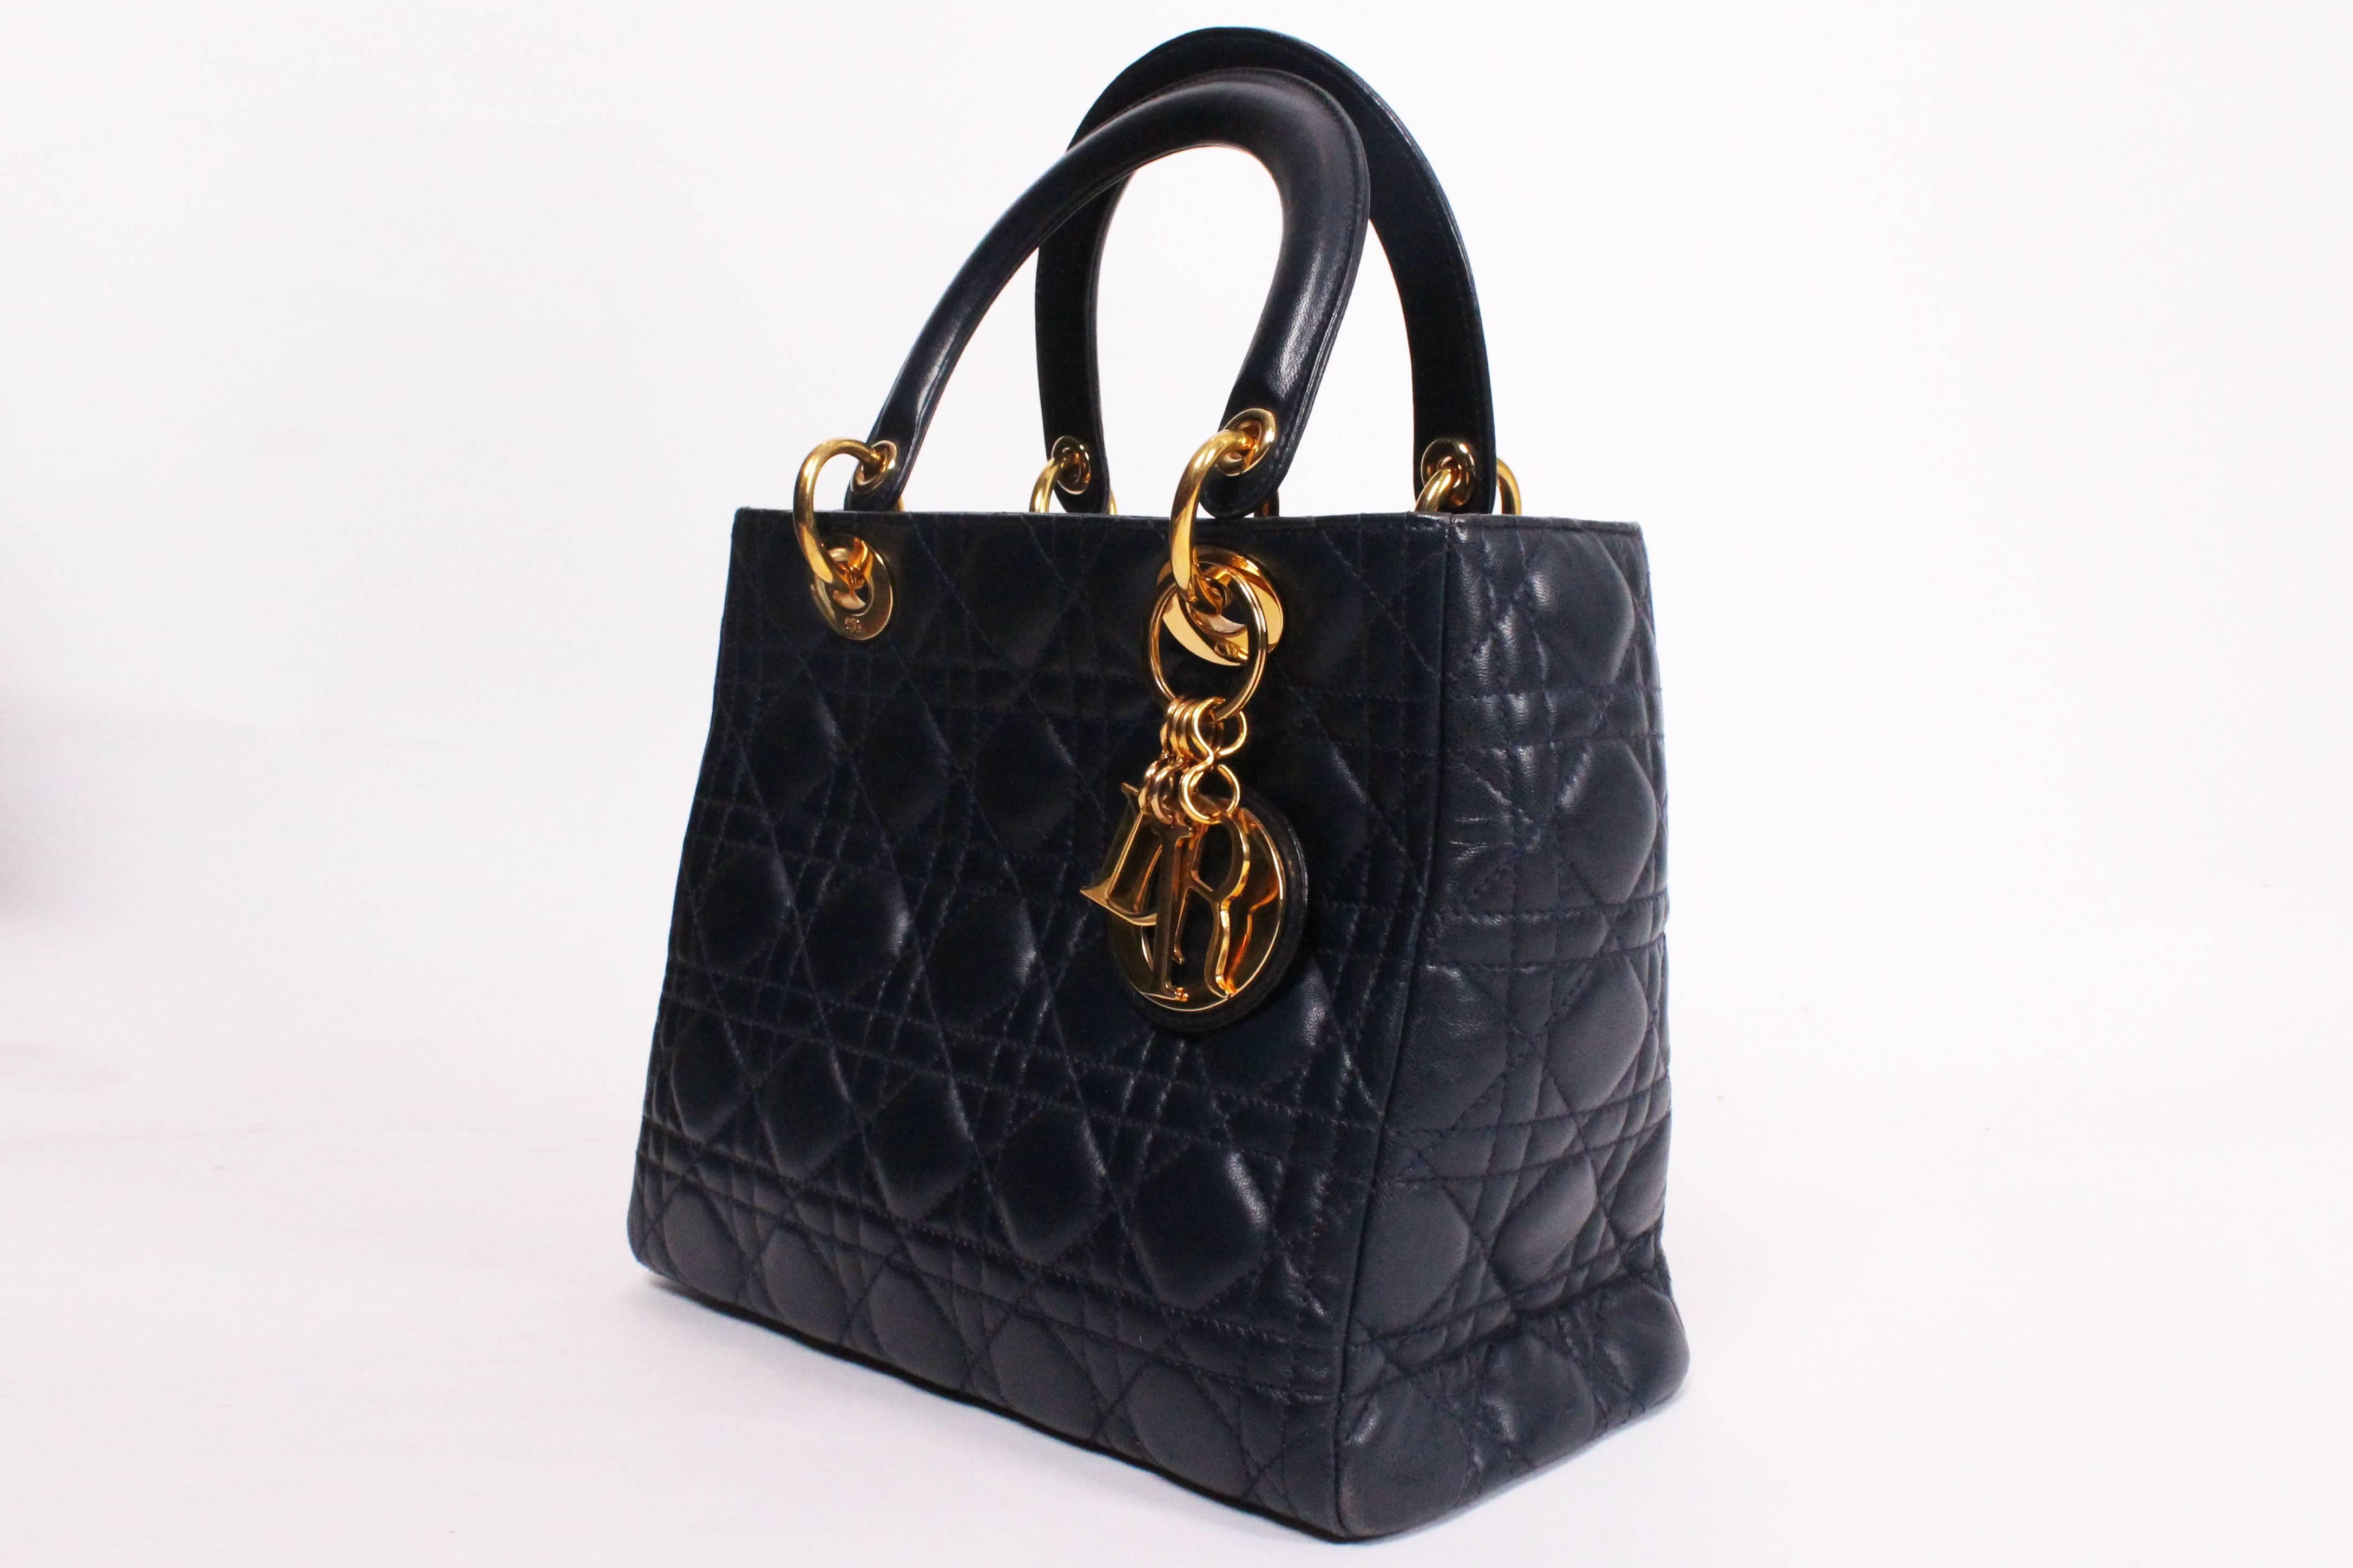 Black Christian Dior D bag in Navy leather.